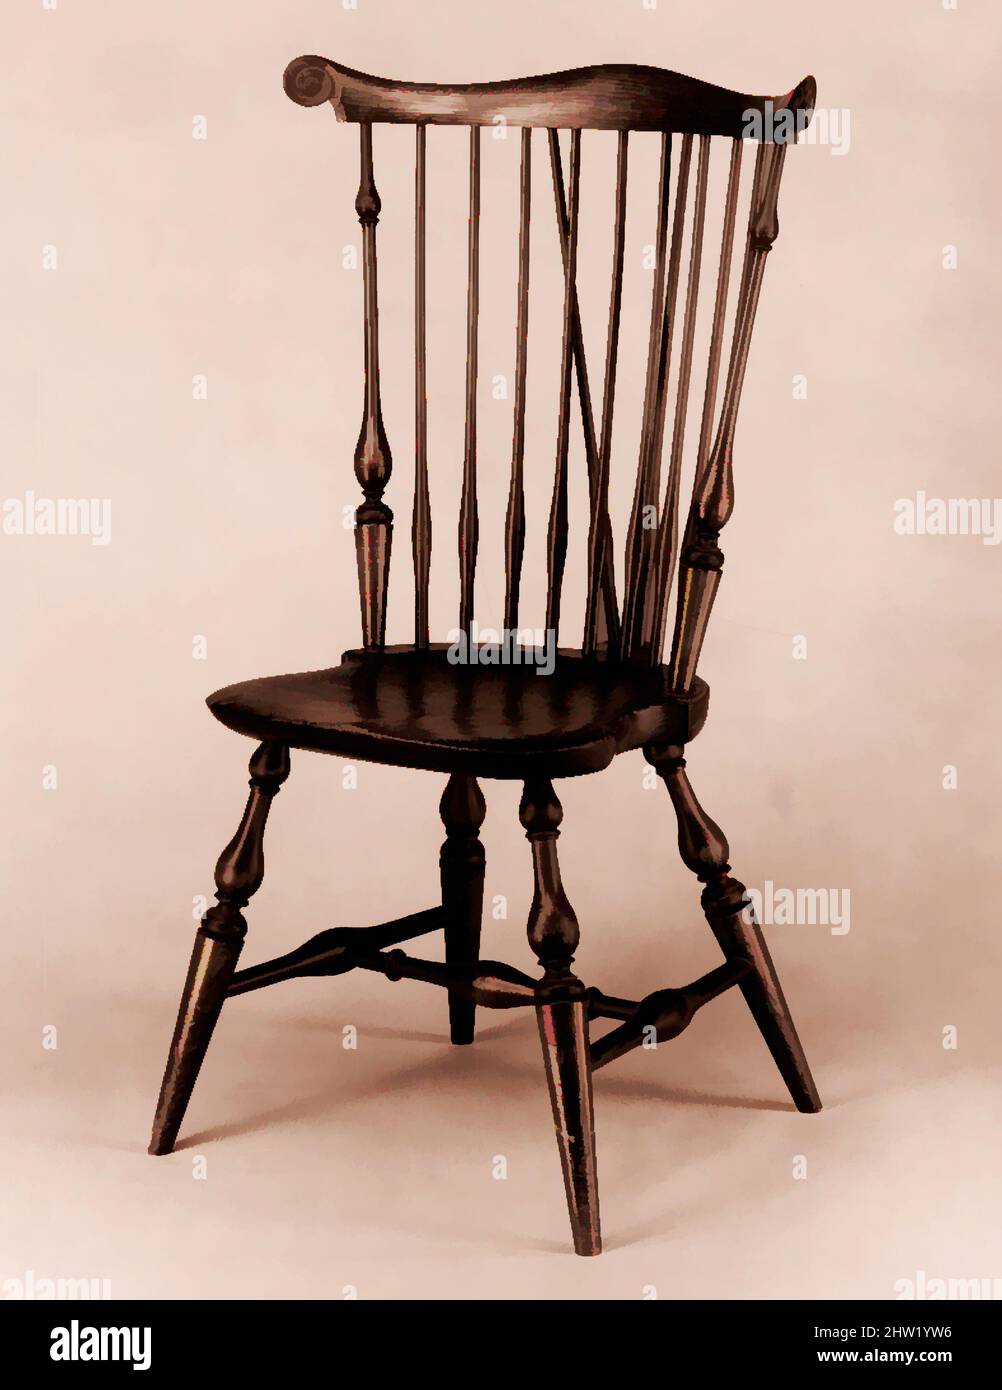 Art inspired by Side Chair, 1900–1925, Made in Framingham, Massachusetts, United States, American, Pine, cherry, ash, 40 3/4 x 25 x 19 1/4 in. (103.5 x 63.5 x 48.9 cm), Furniture, Wallace Nutting (American, Rockbottom, Massachusetts 1861–1941 Framingham, Massachusetts, Classic works modernized by Artotop with a splash of modernity. Shapes, color and value, eye-catching visual impact on art. Emotions through freedom of artworks in a contemporary way. A timeless message pursuing a wildly creative new direction. Artists turning to the digital medium and creating the Artotop NFT Stock Photo